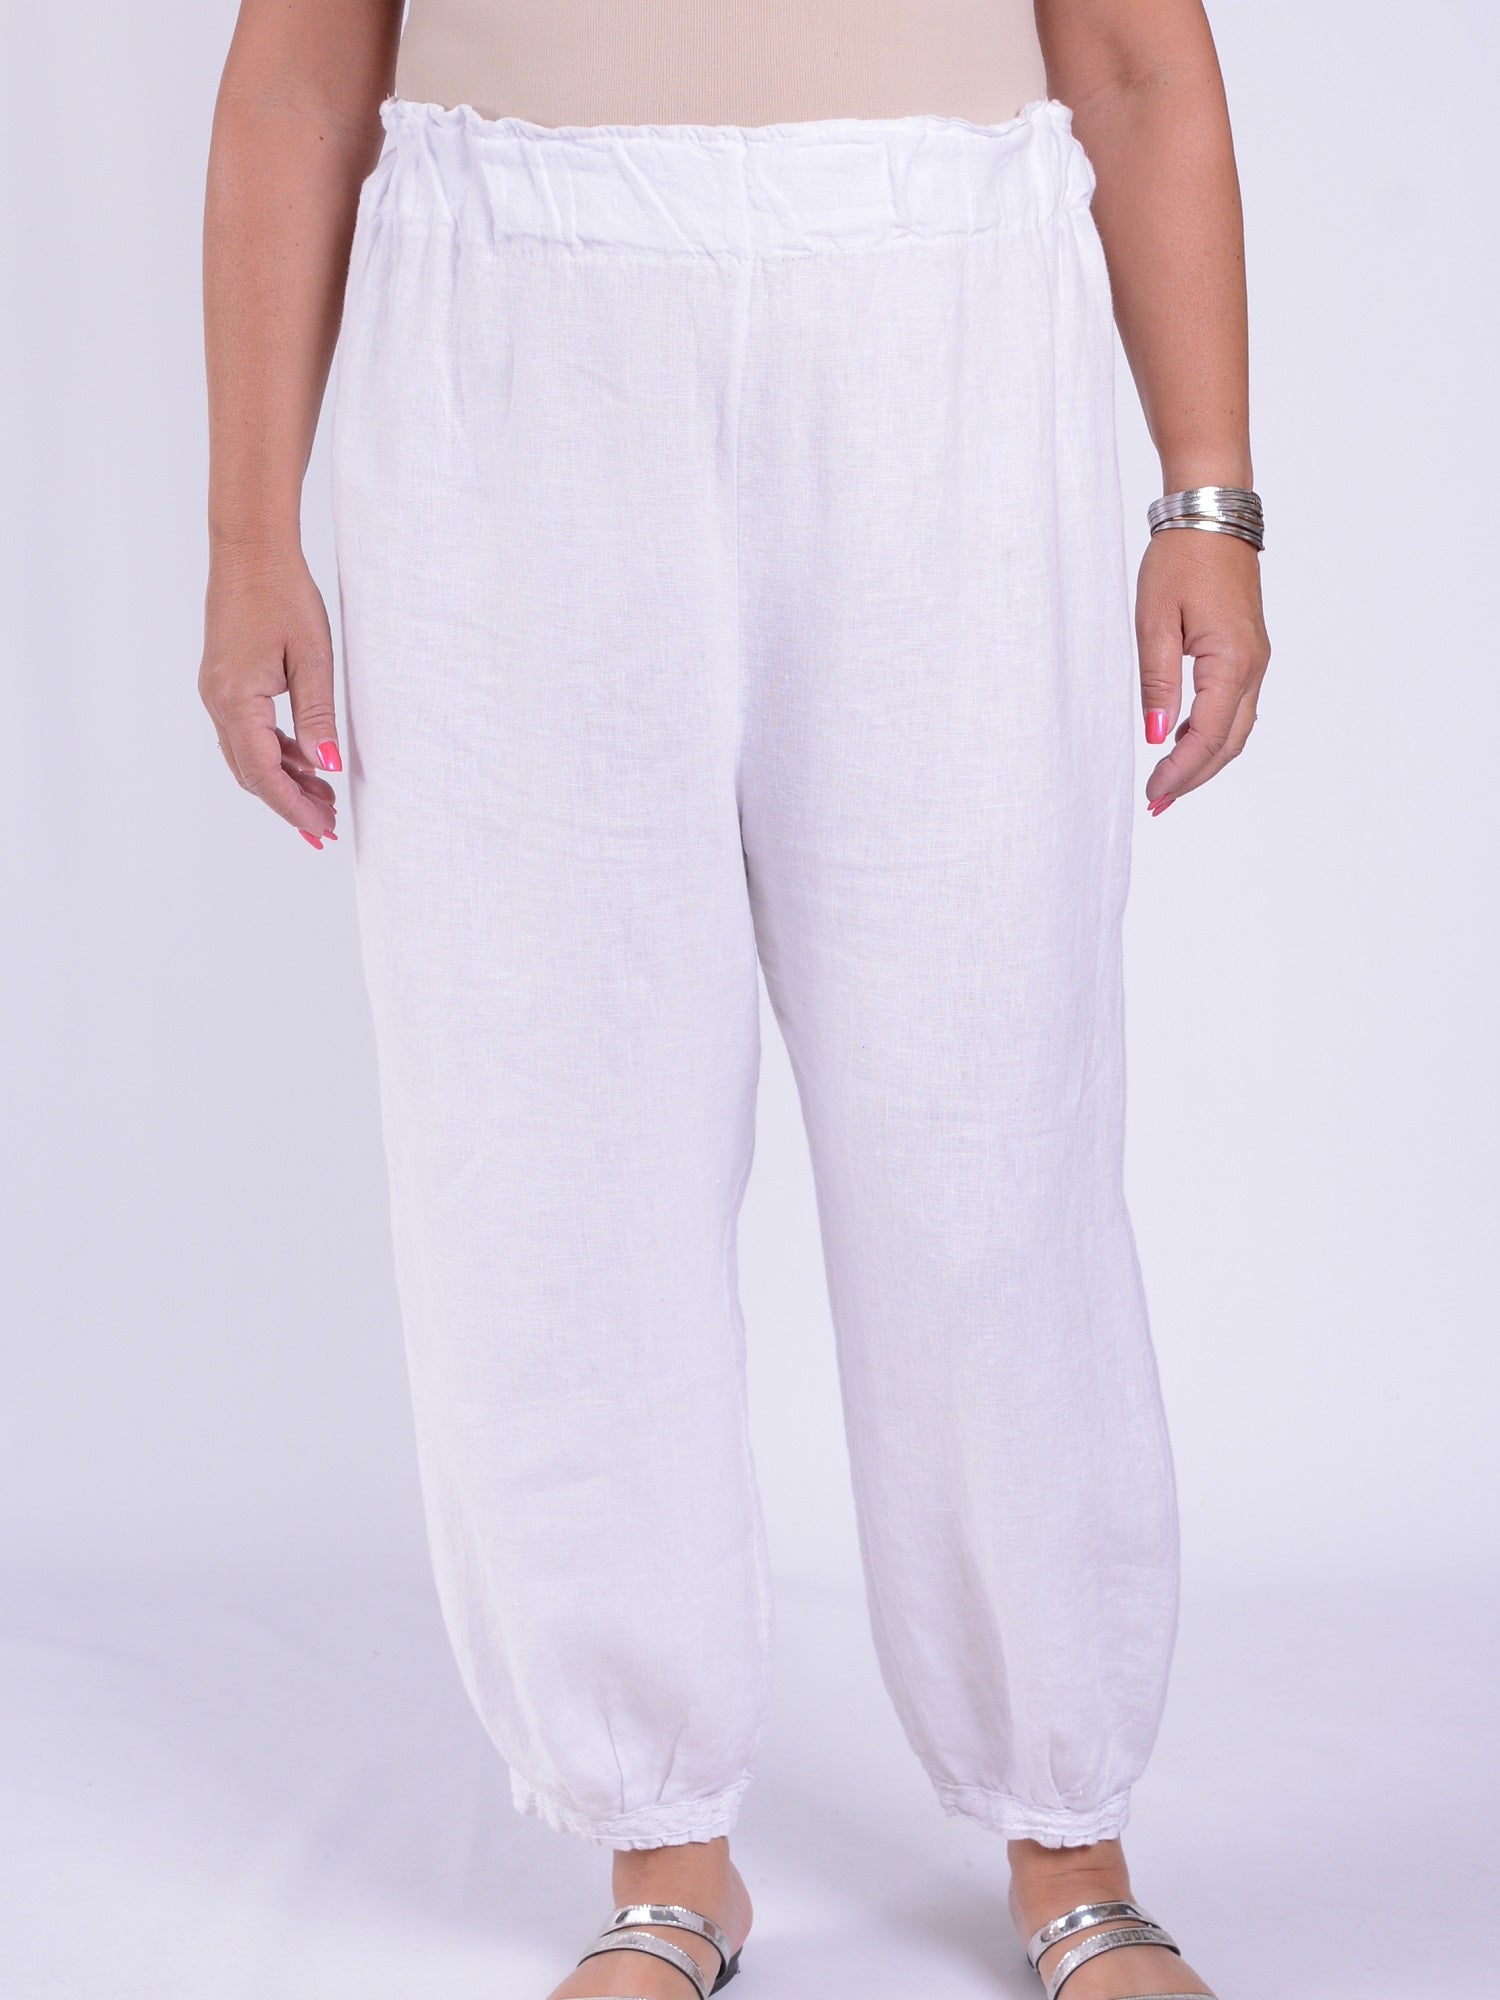 Lace Trim Linen Trousers - 9466, Trousers, Pure Plus Clothing, Lagenlook Clothing, Plus Size Fashion, Over 50 Fashion